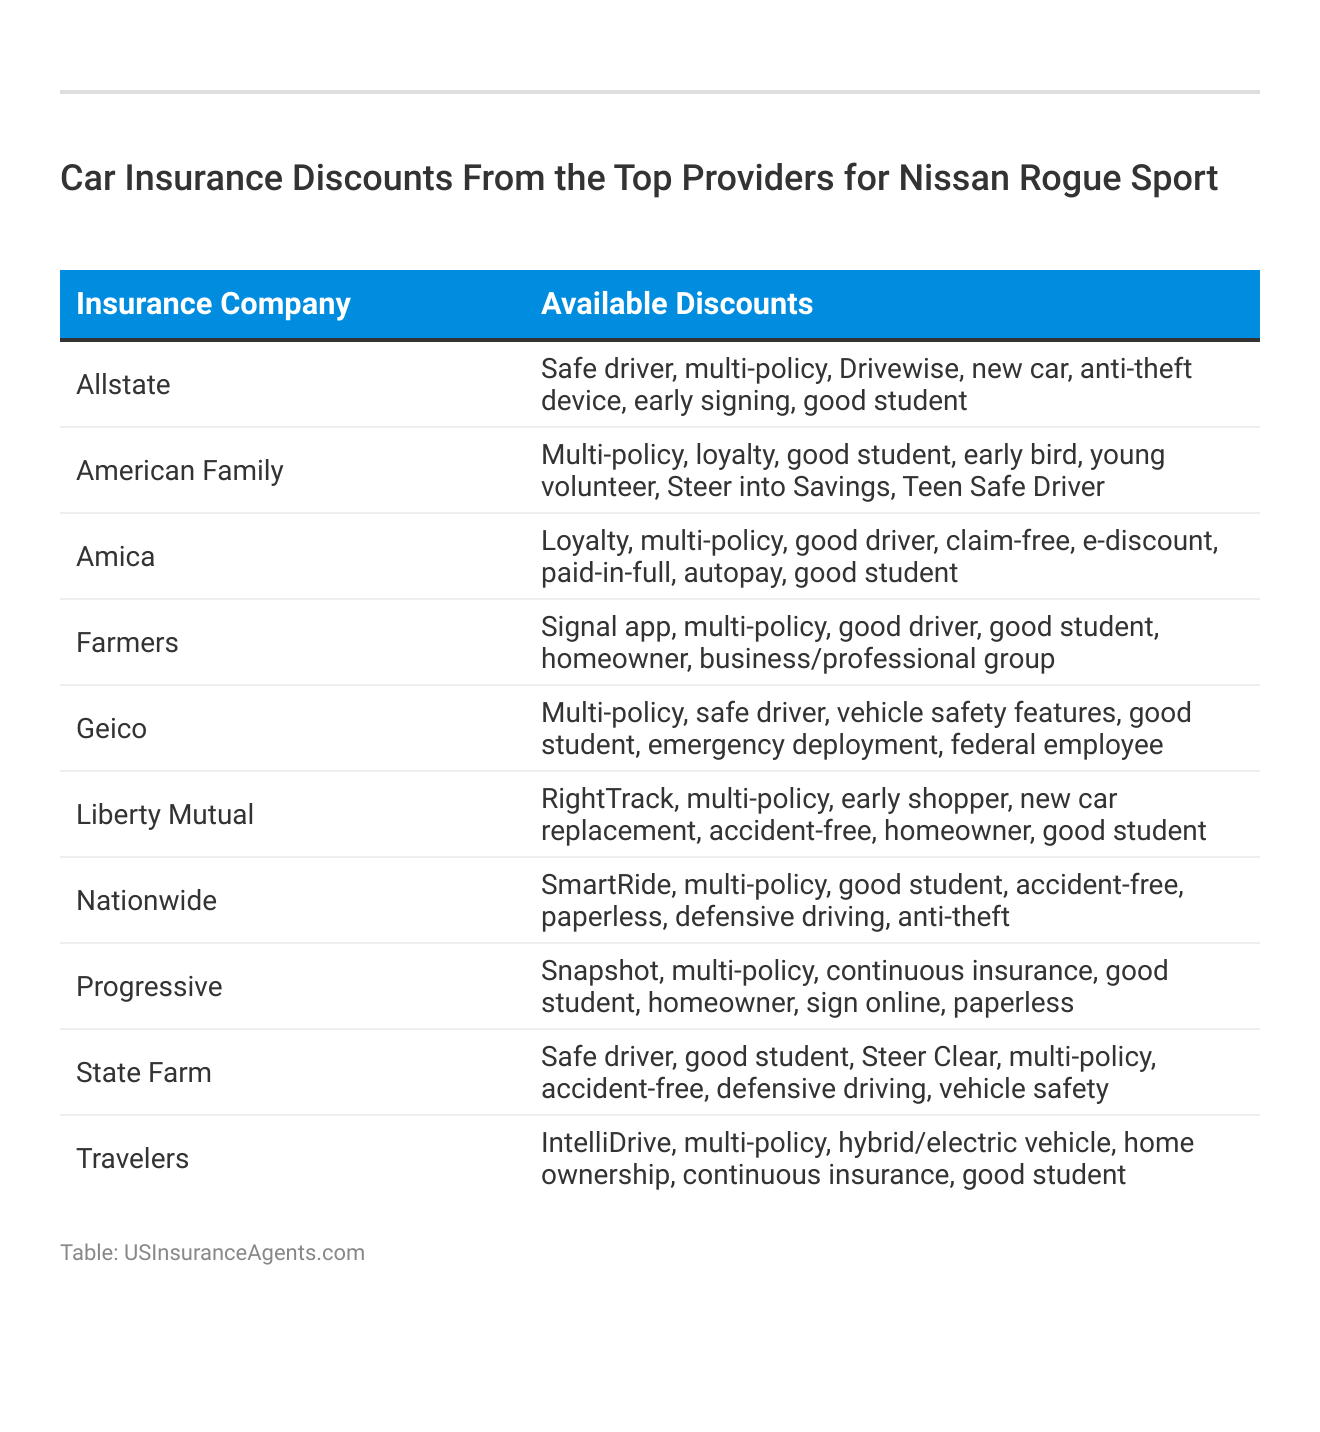 <h3>Car Insurance Discounts From the Top Providers for Nissan Rogue Sport</h3>